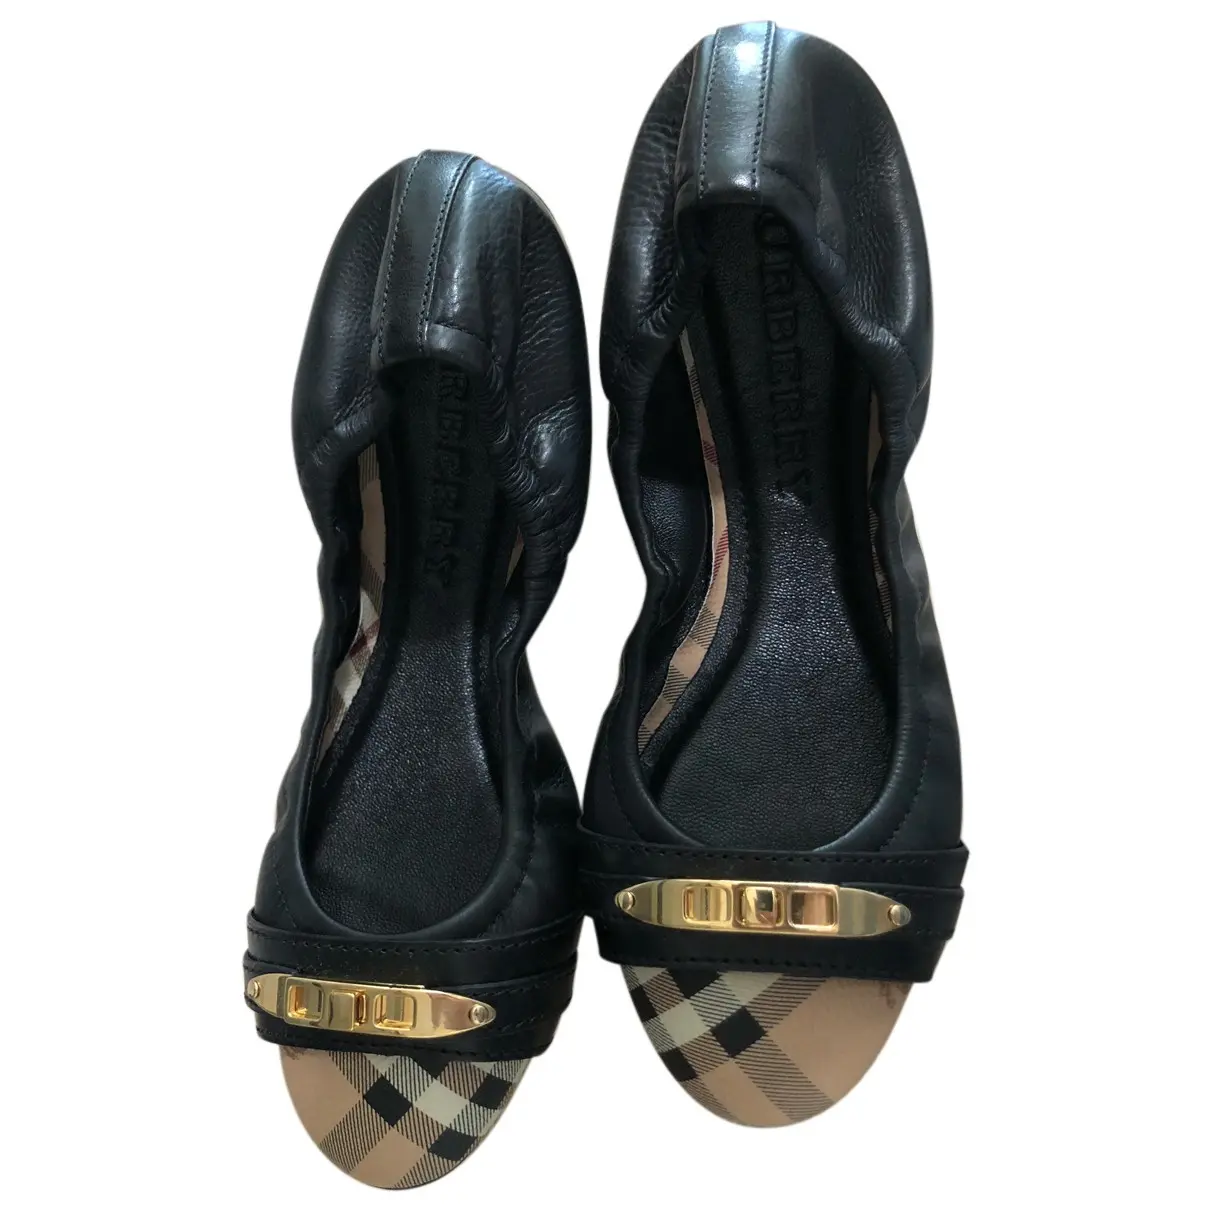 Leather ballet flats Burberry